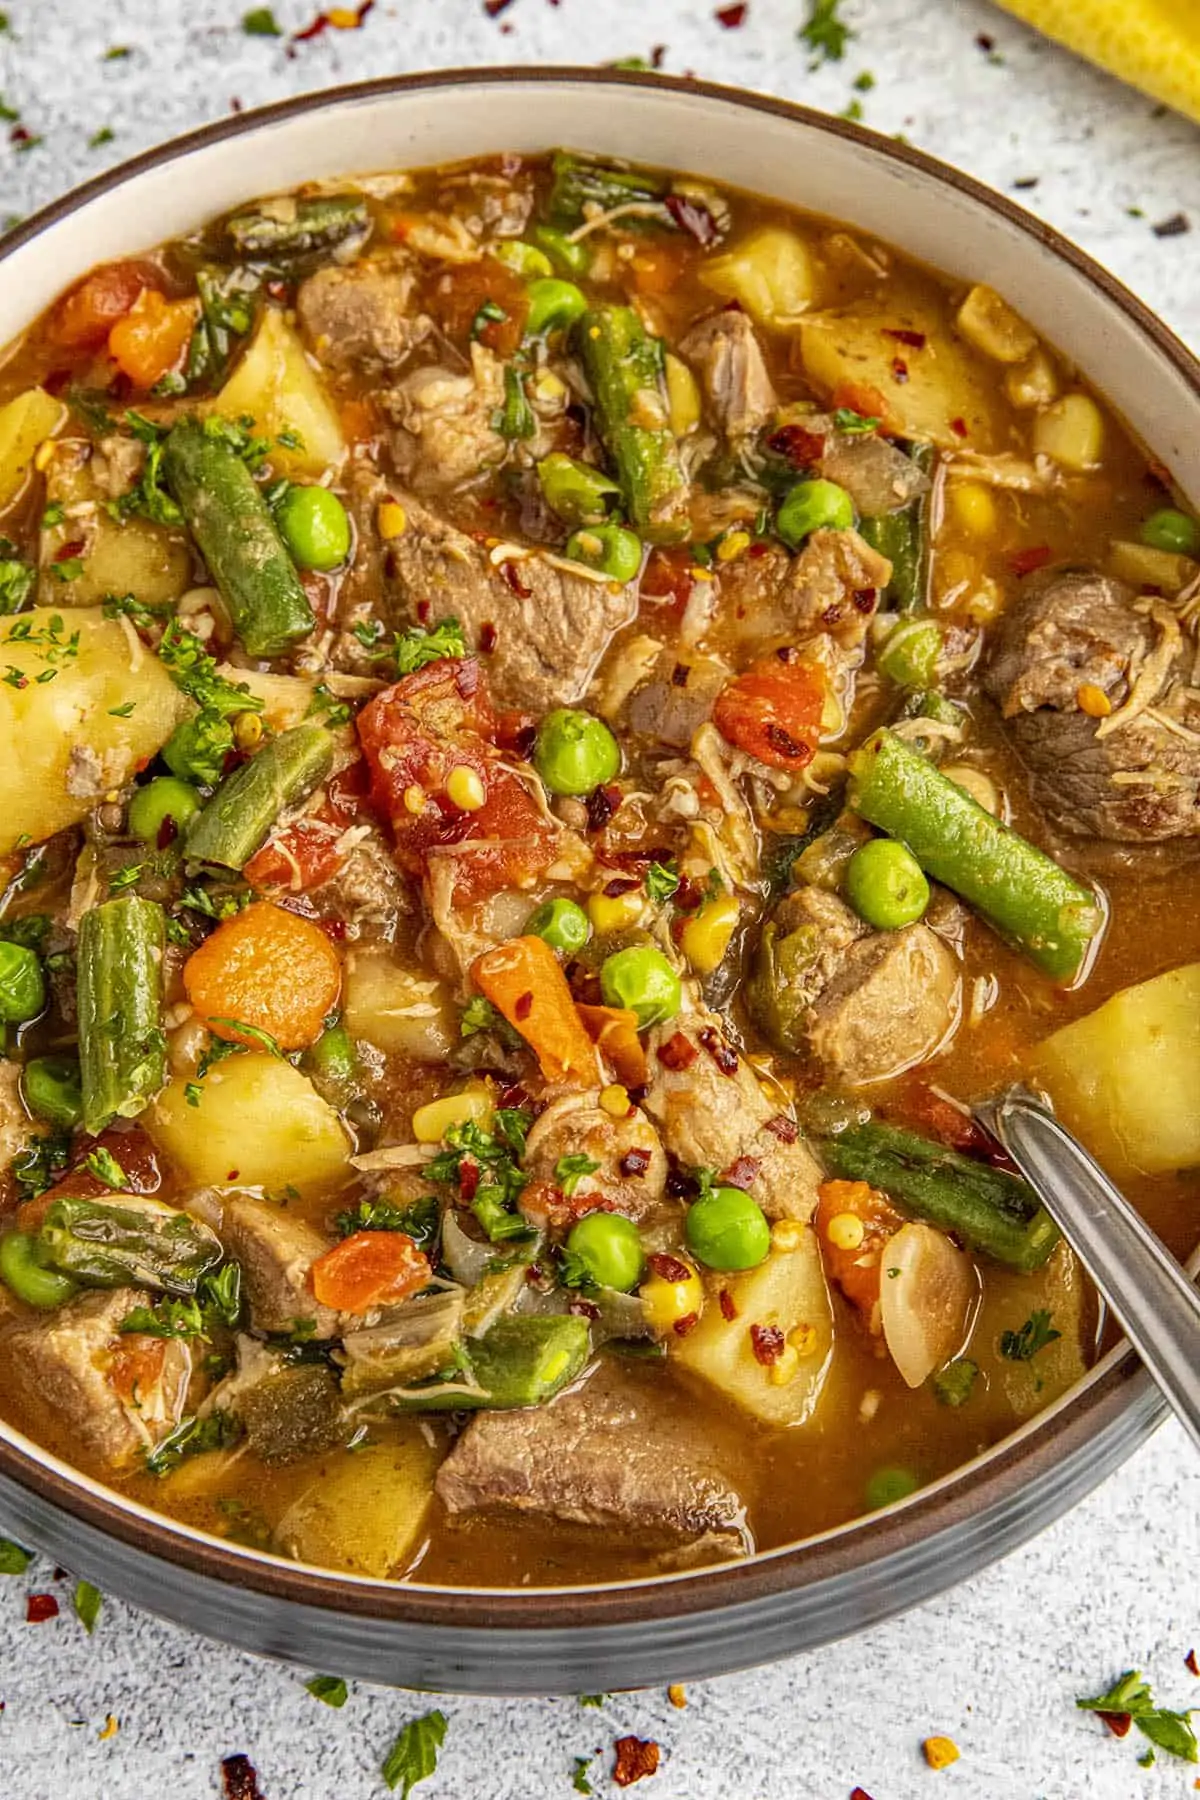 Chunky booyah stew with lots of meat and vegetables